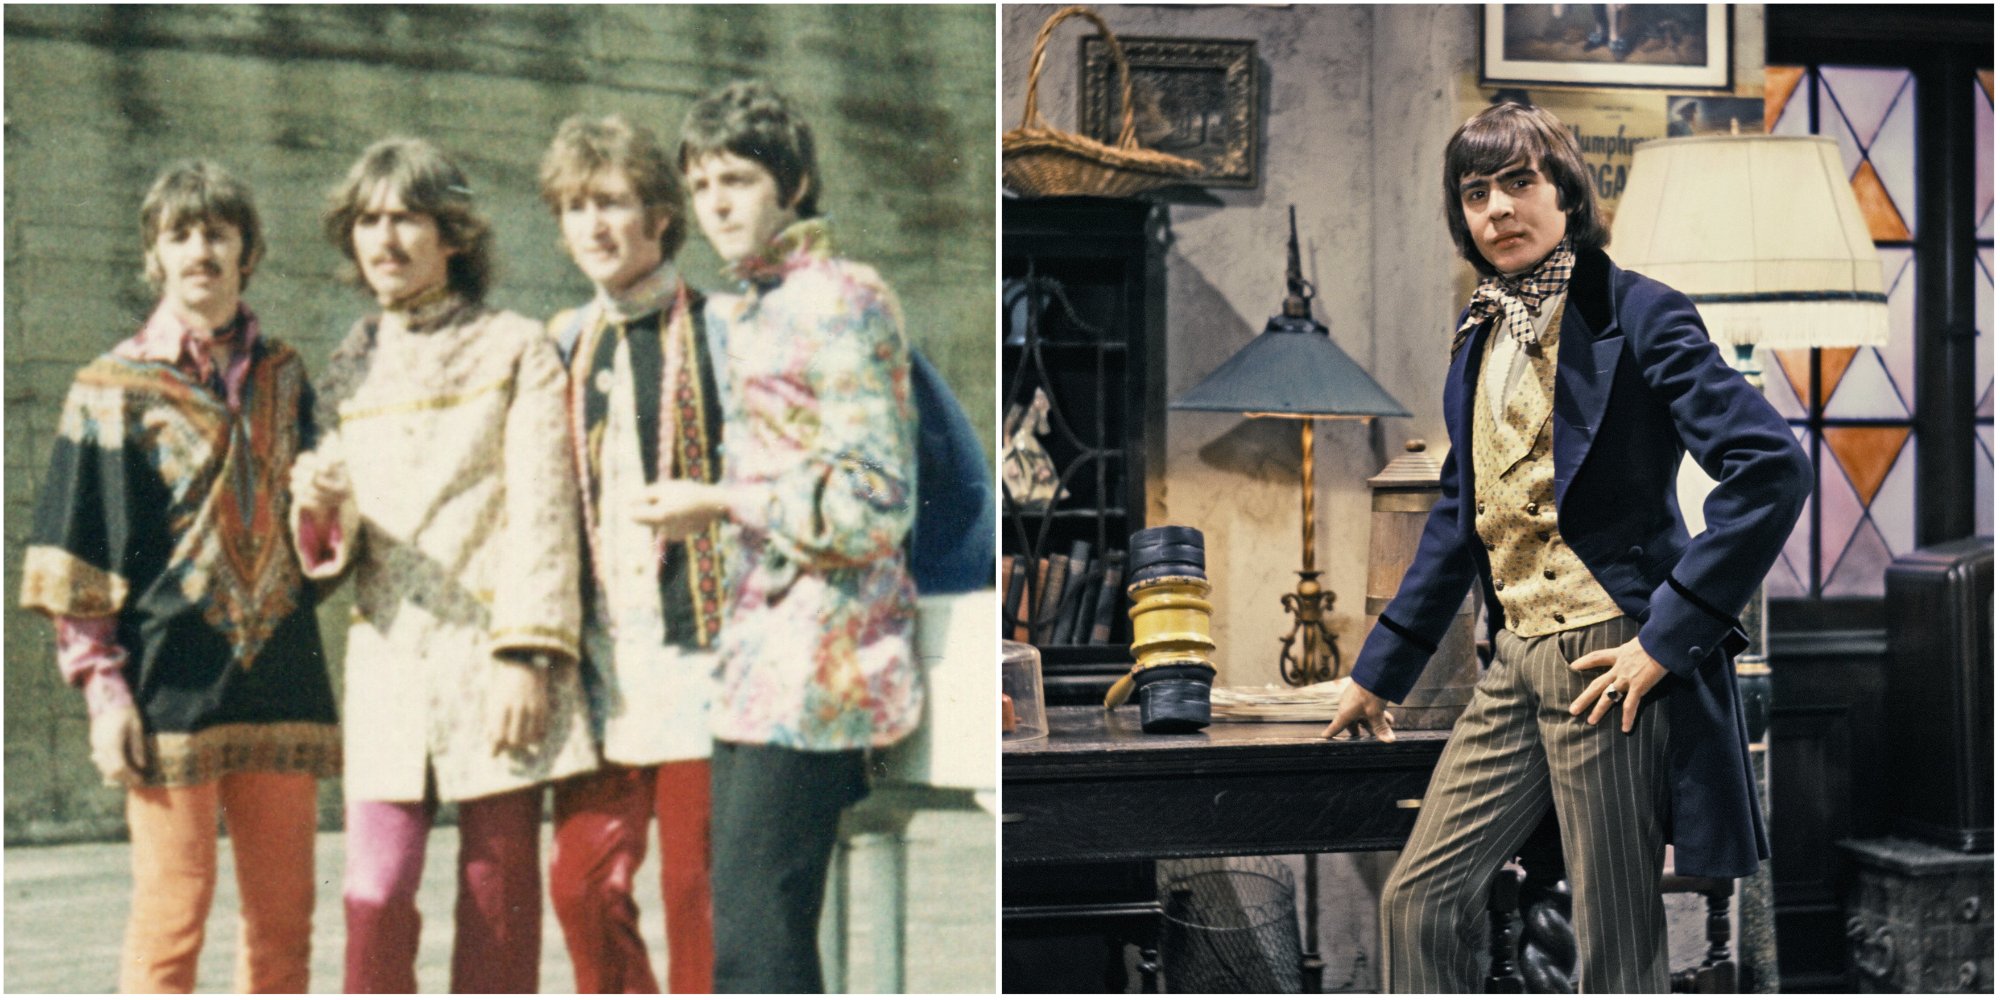 ‘The Monkees’: Davy Jones Quietly Sang This Beatles ‘Magical Mystery Tour’ Song Twice During the Series Final Episode